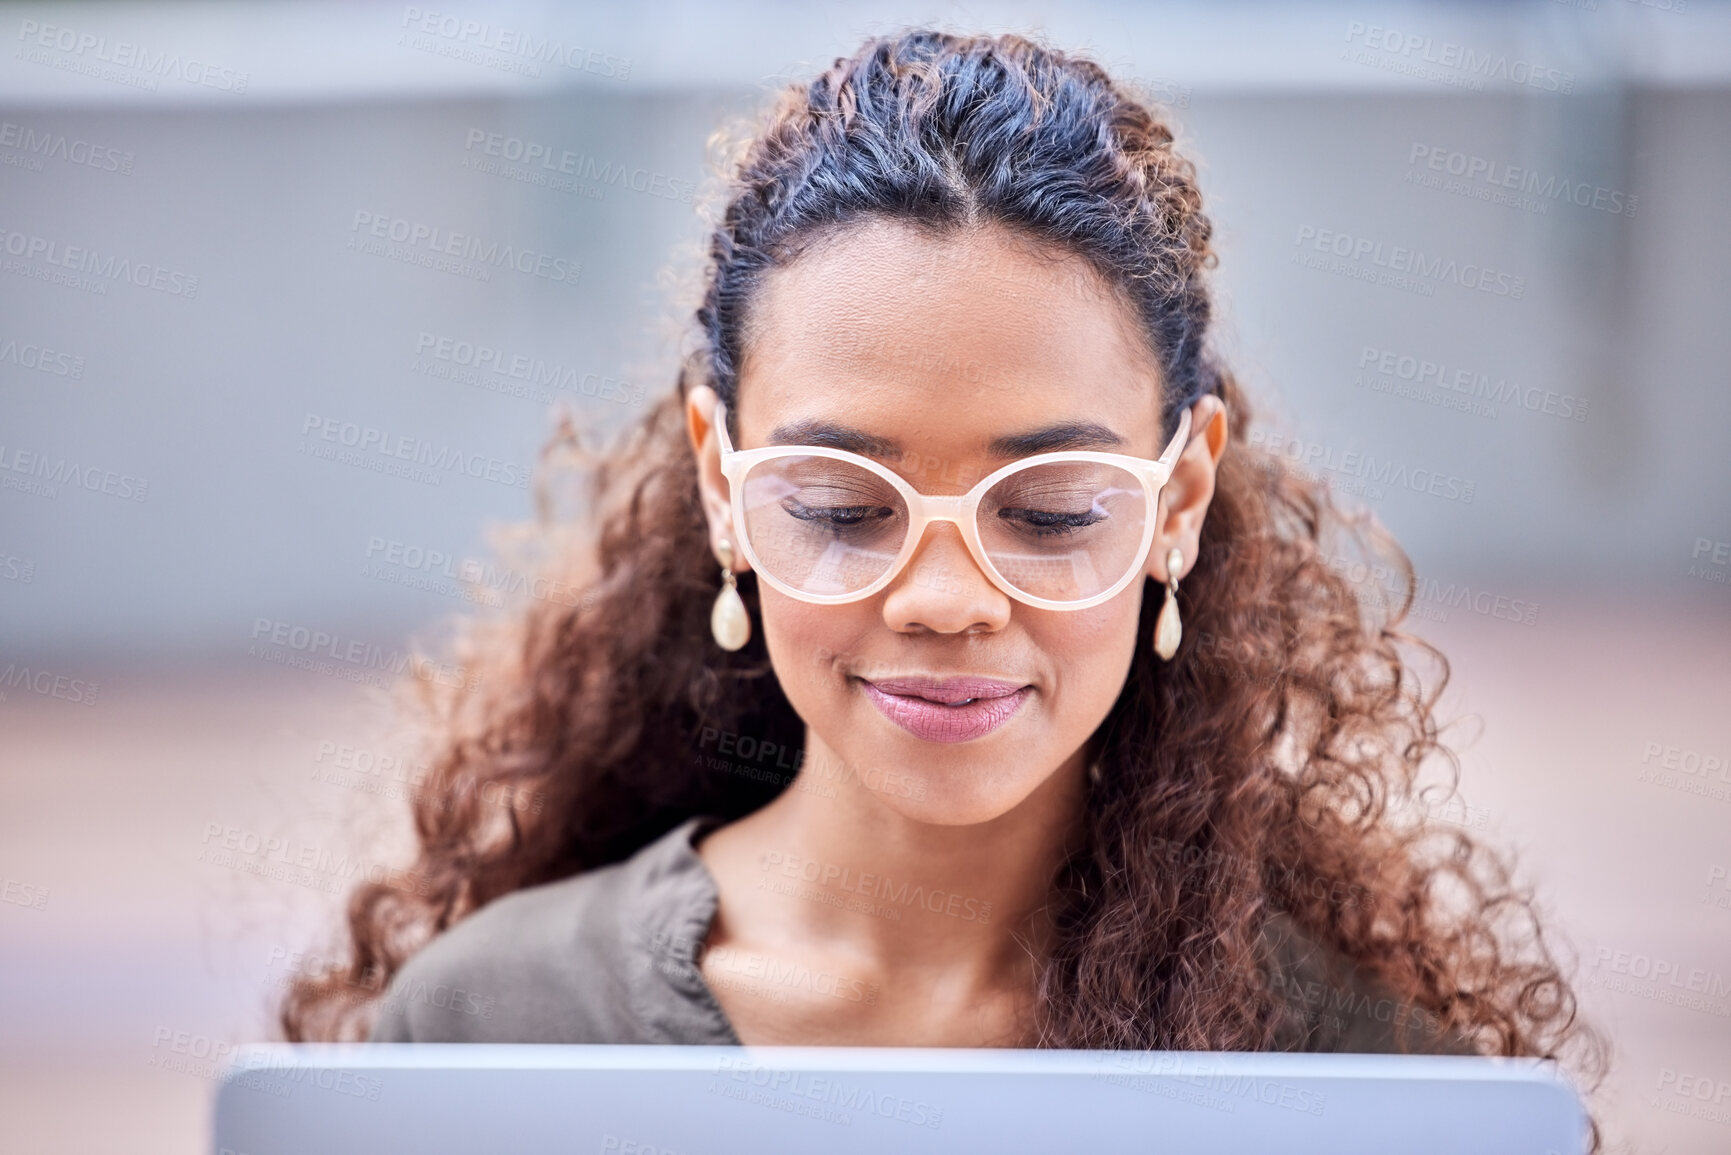 Buy stock photo Shot of a young businesswoman using a laptop at work